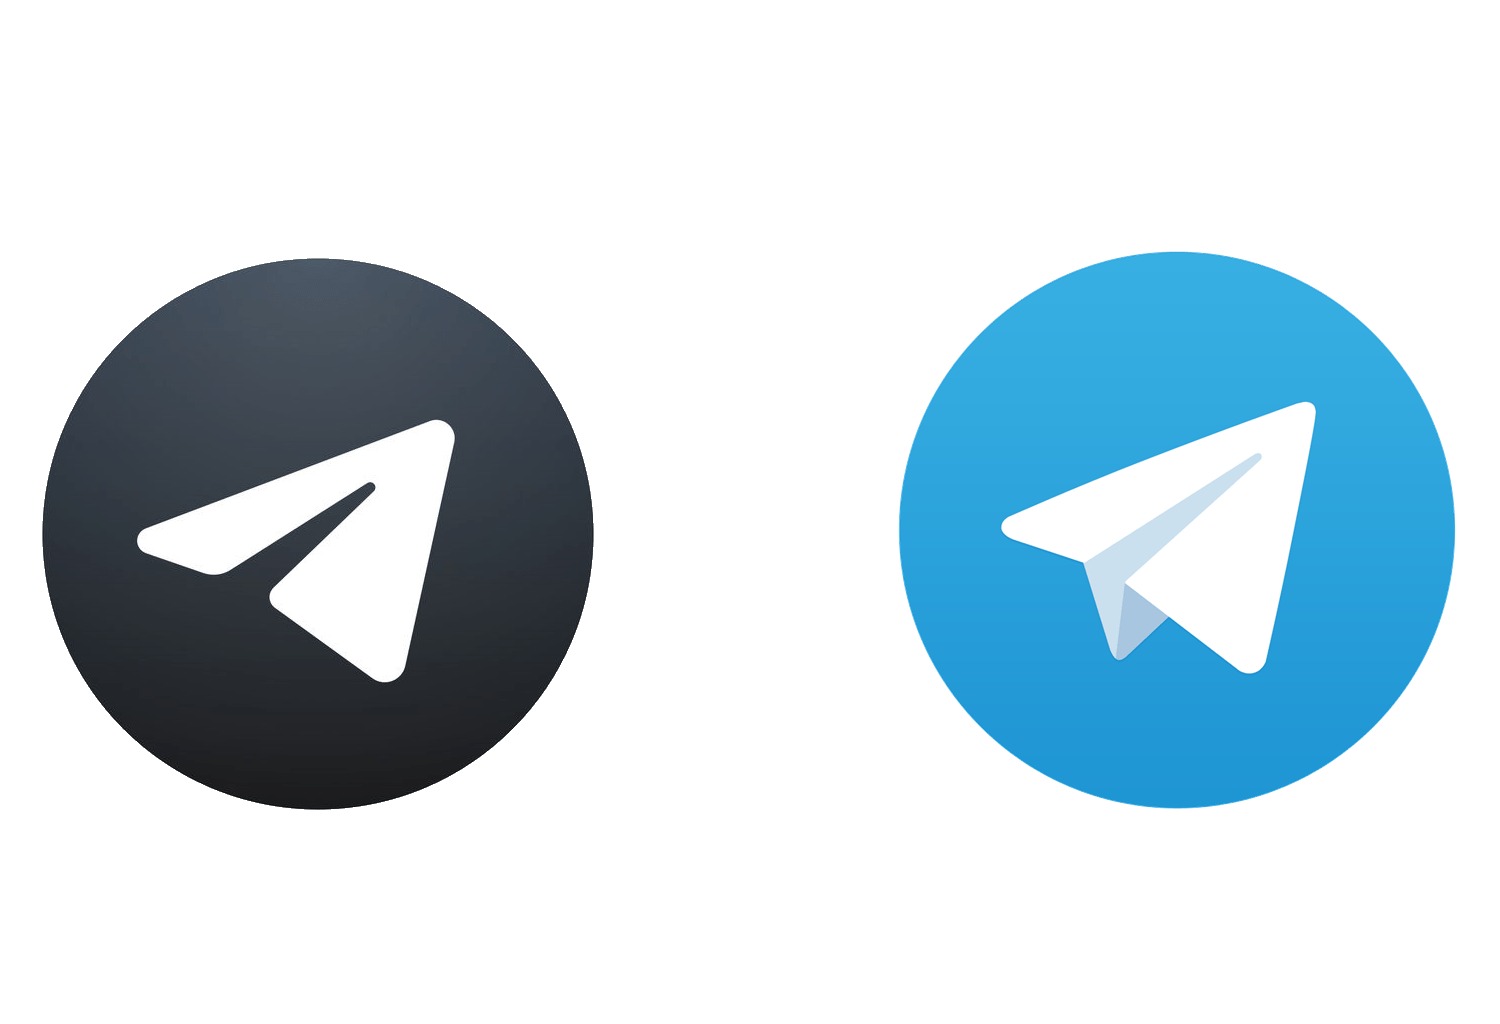 Telegram app logo in black and blue. 'Telegram video loss' search query results.